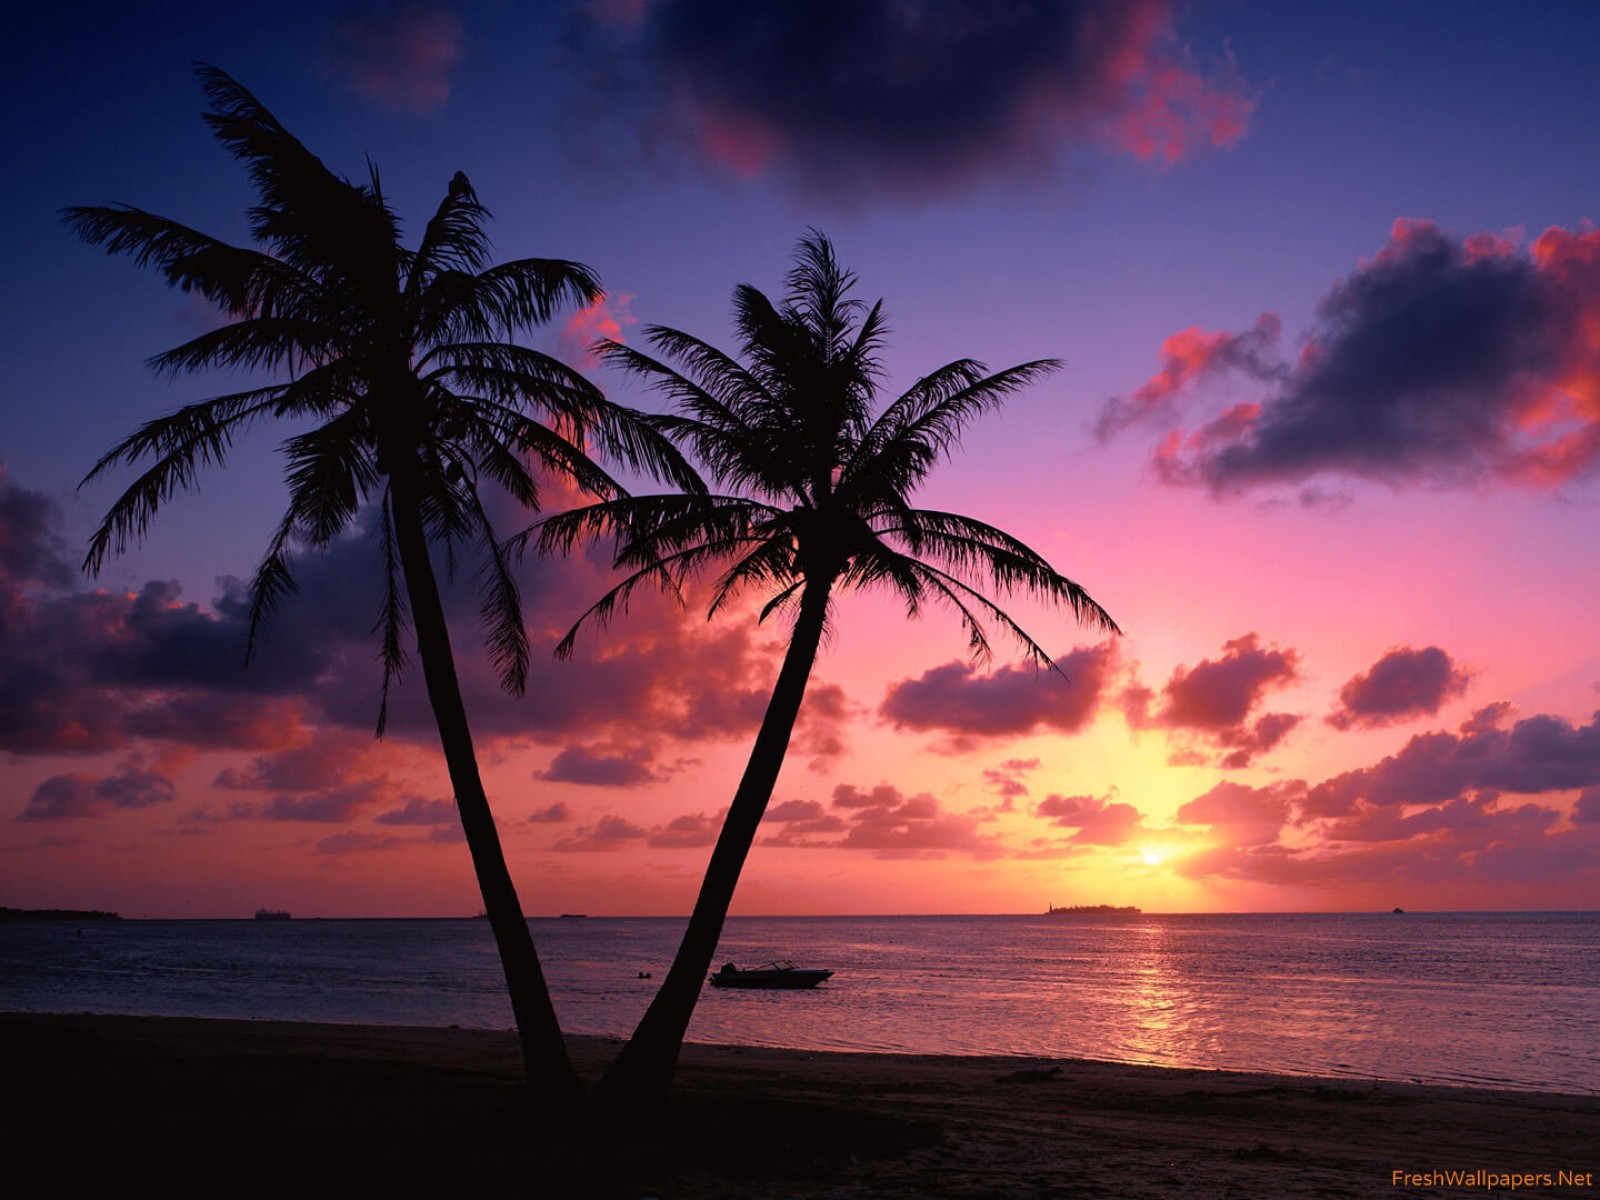 Tropical Beach Palm Trees Sunset wallpapers | Freshwallpapers